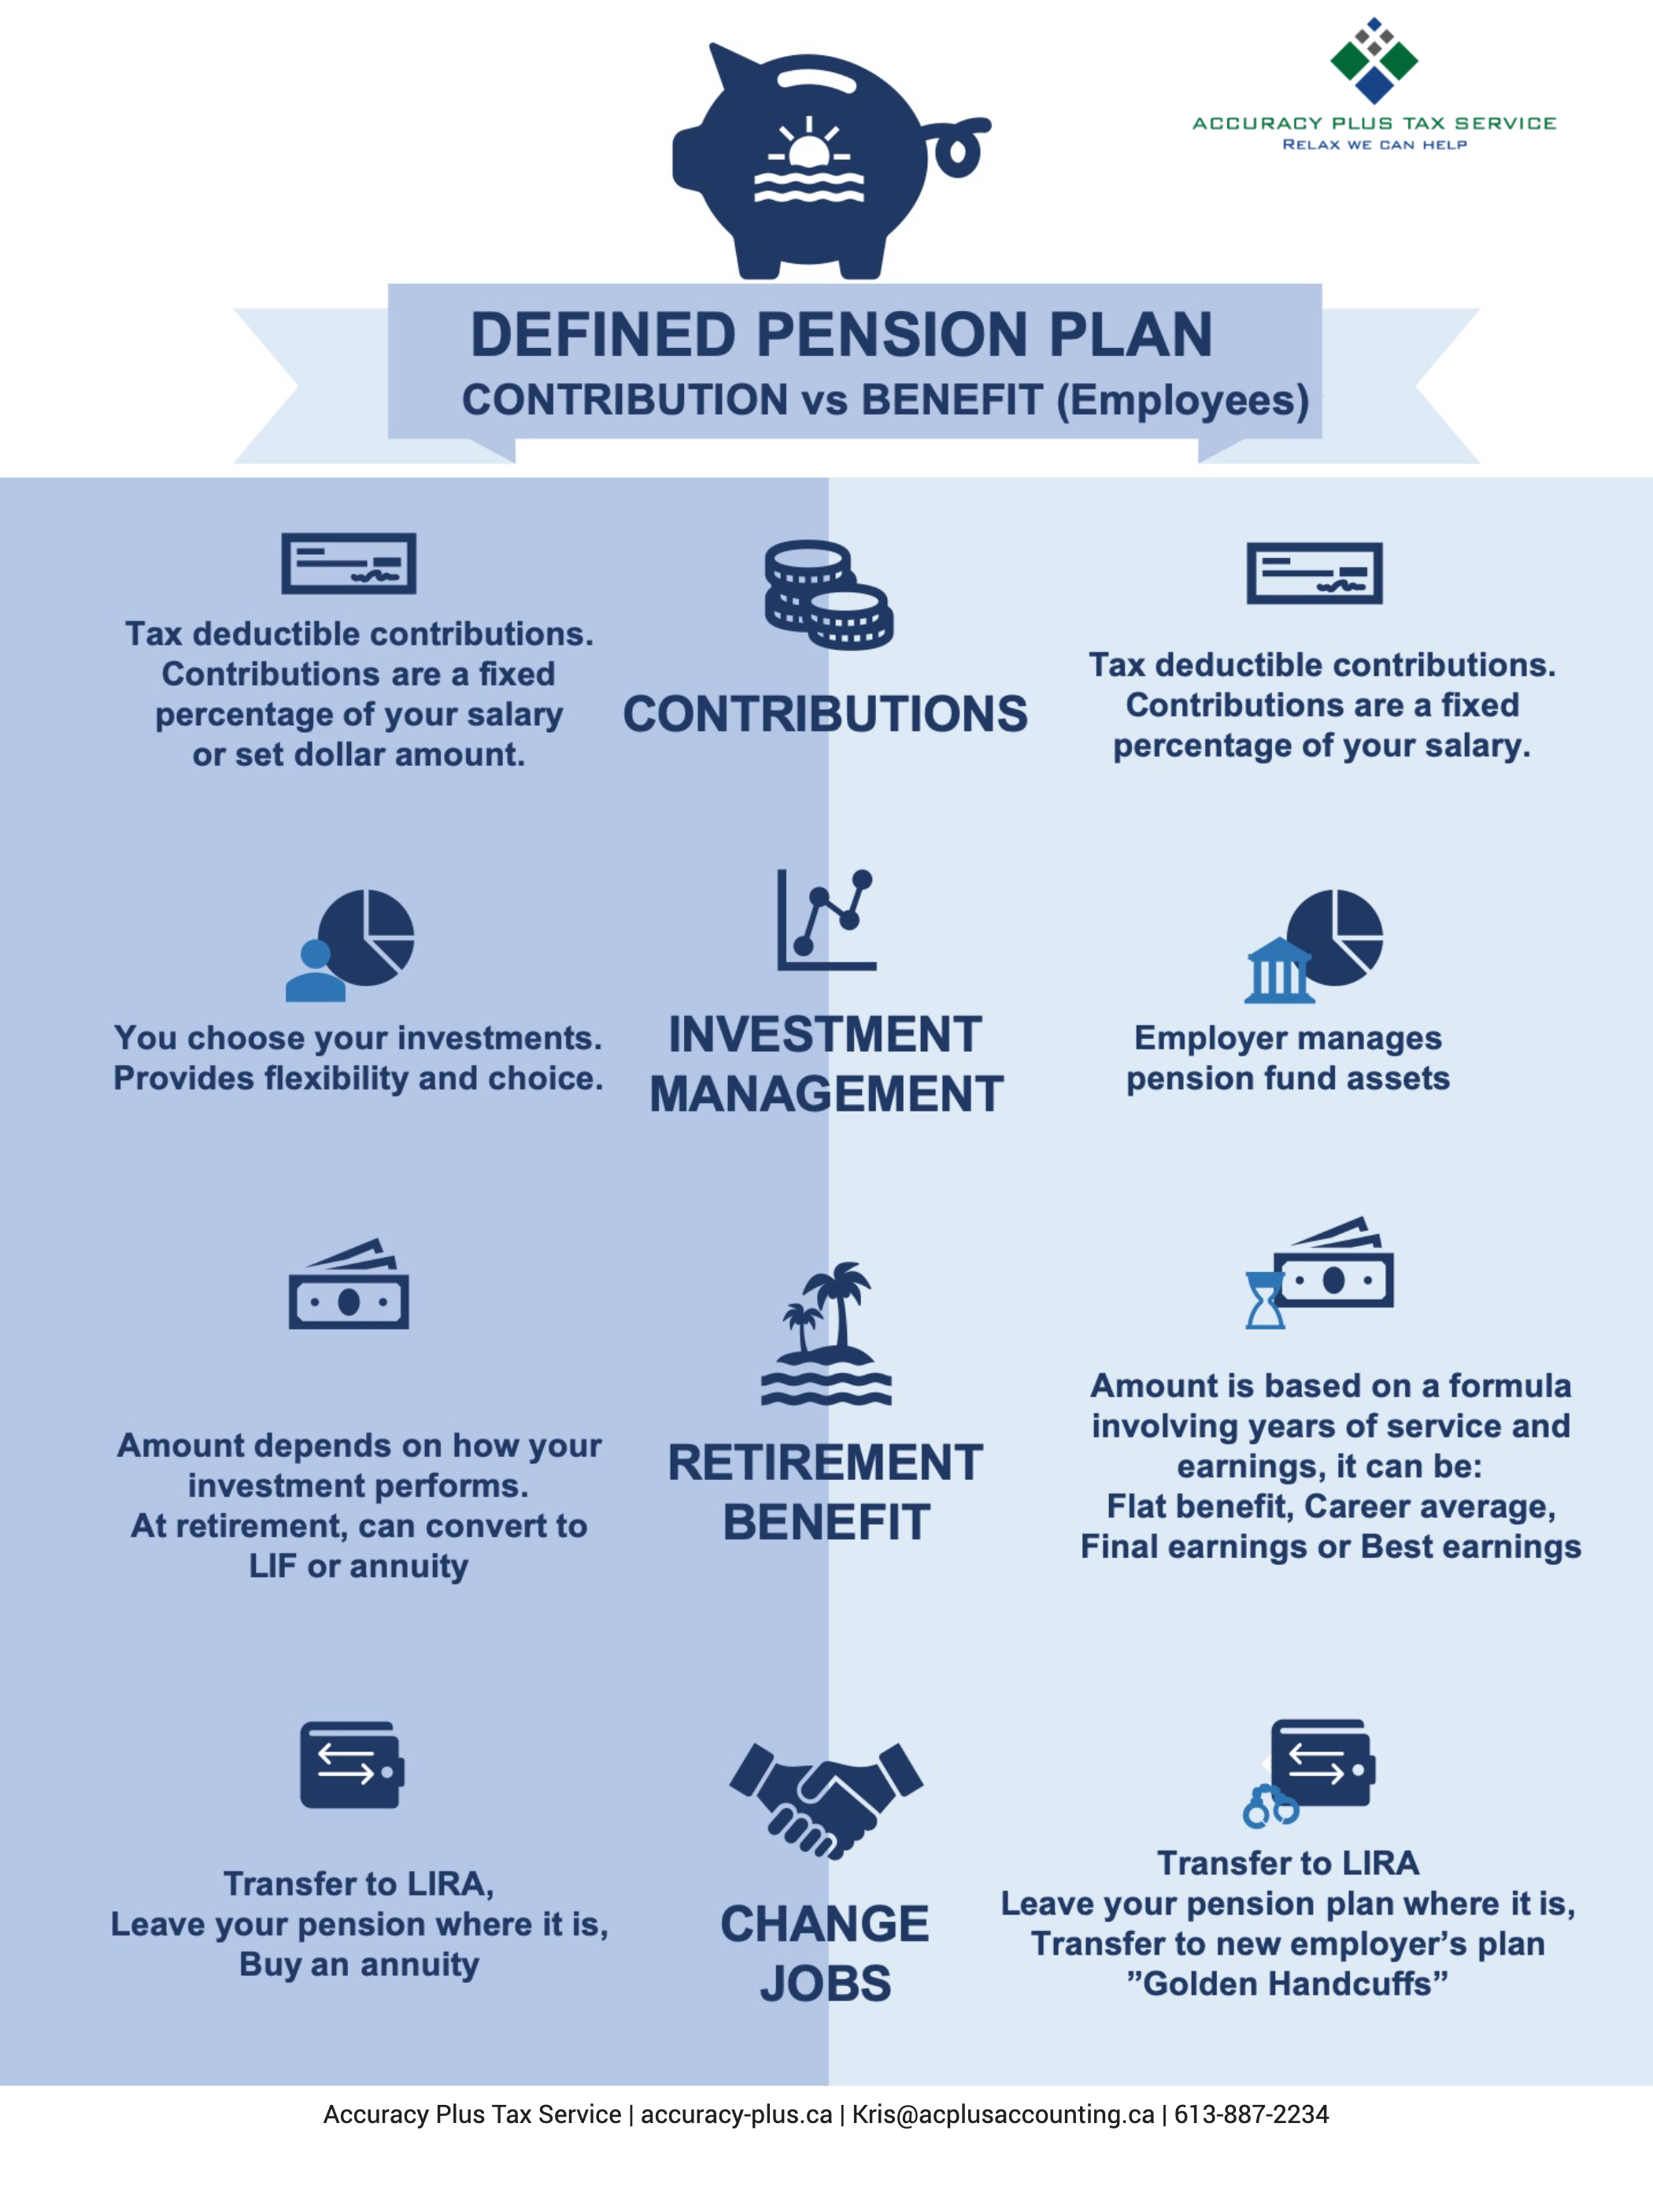 defined-contribution-vs-benefit-pension-plan-for-employees-accuracy